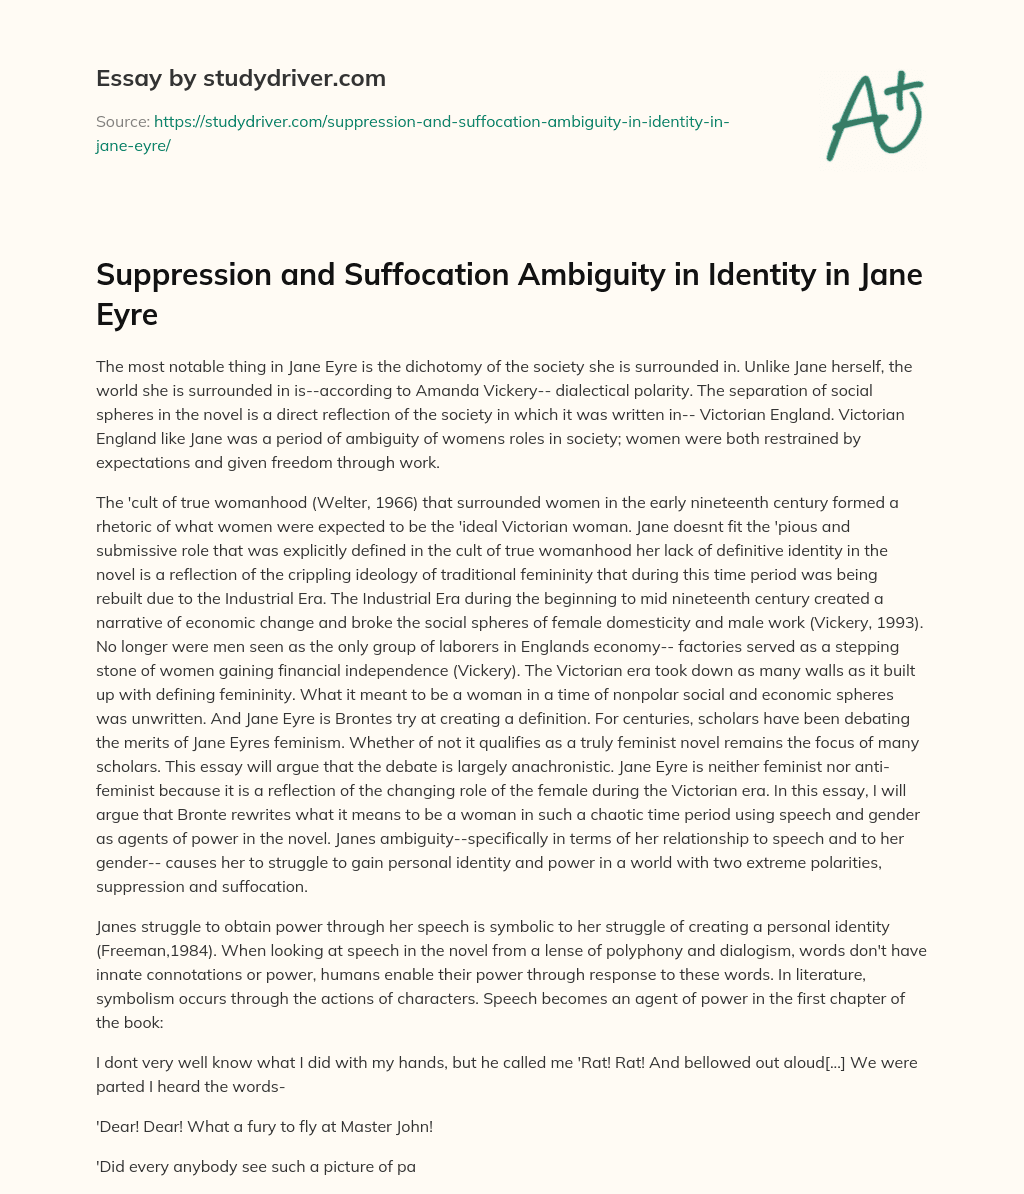 Suppression and Suffocation Ambiguity in Identity in Jane Eyre essay